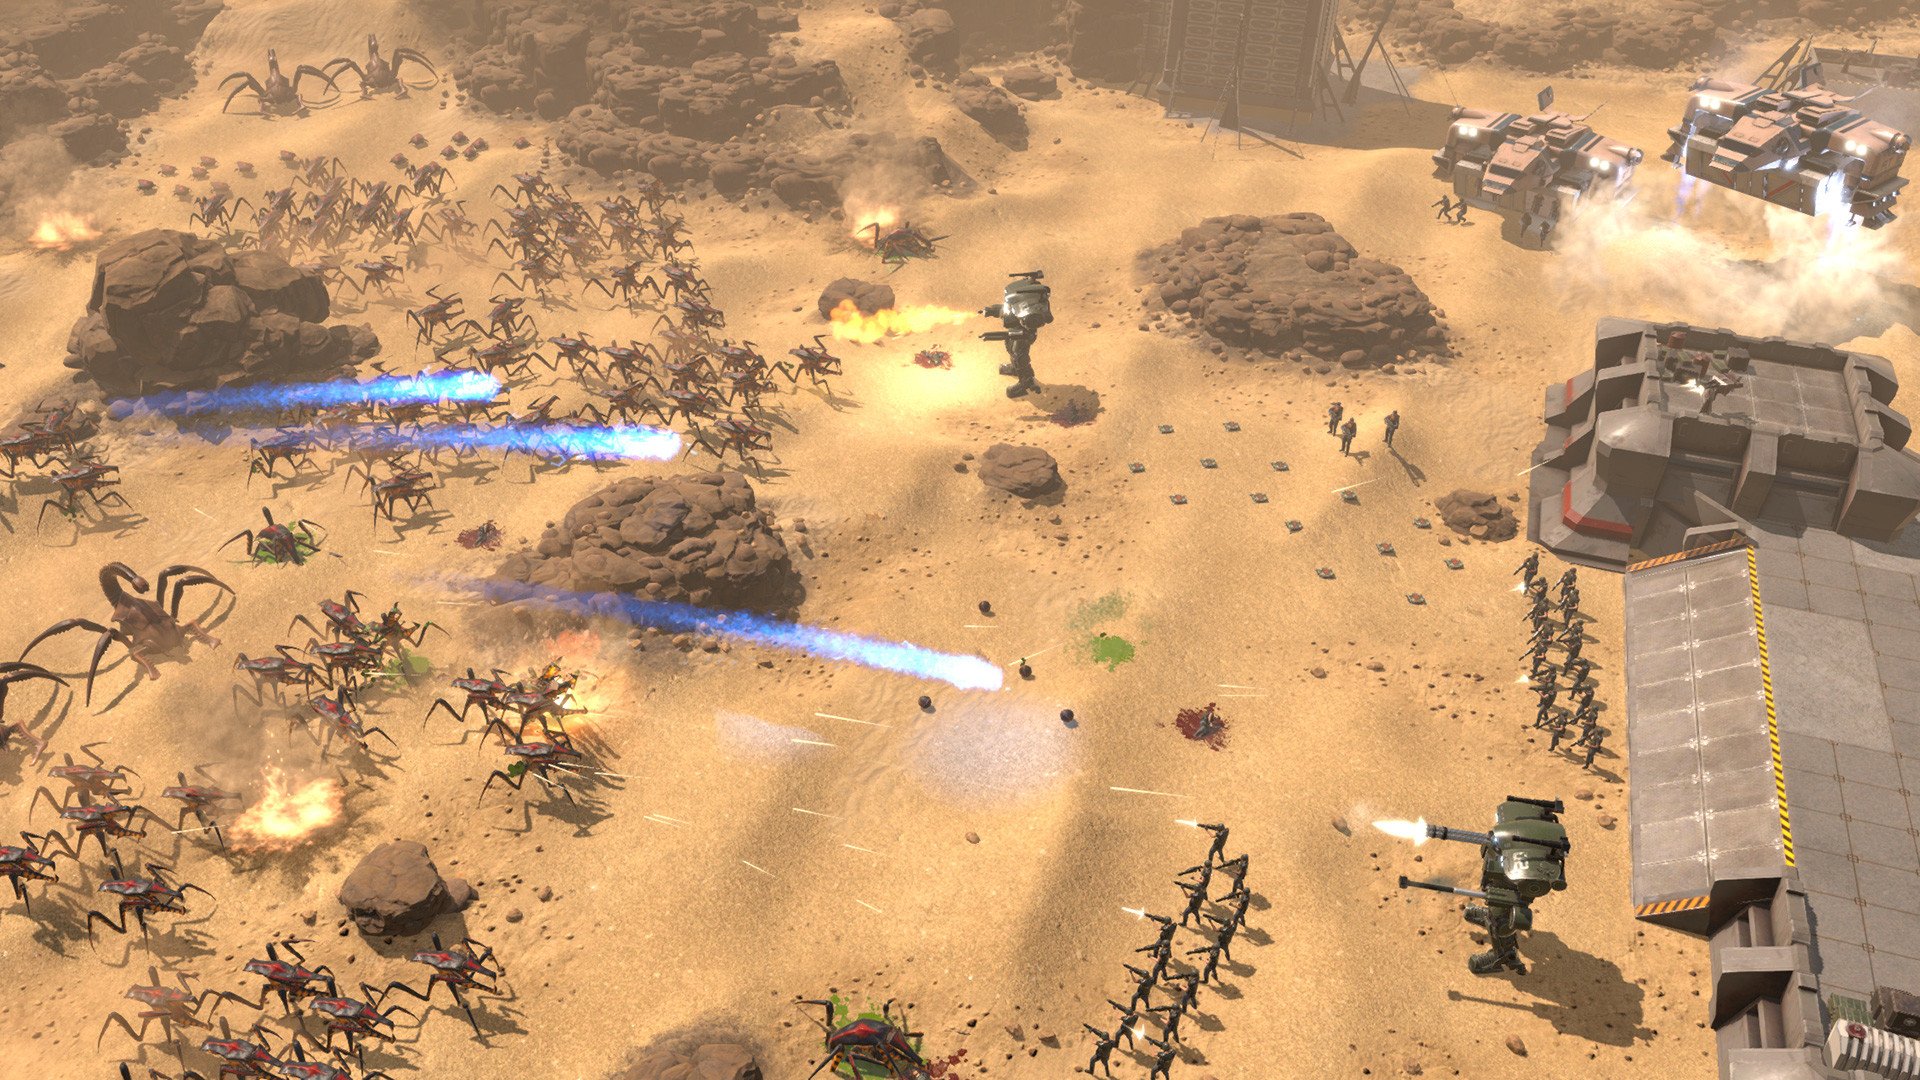 Screenshot for the game Starship Troopers - Terran Command